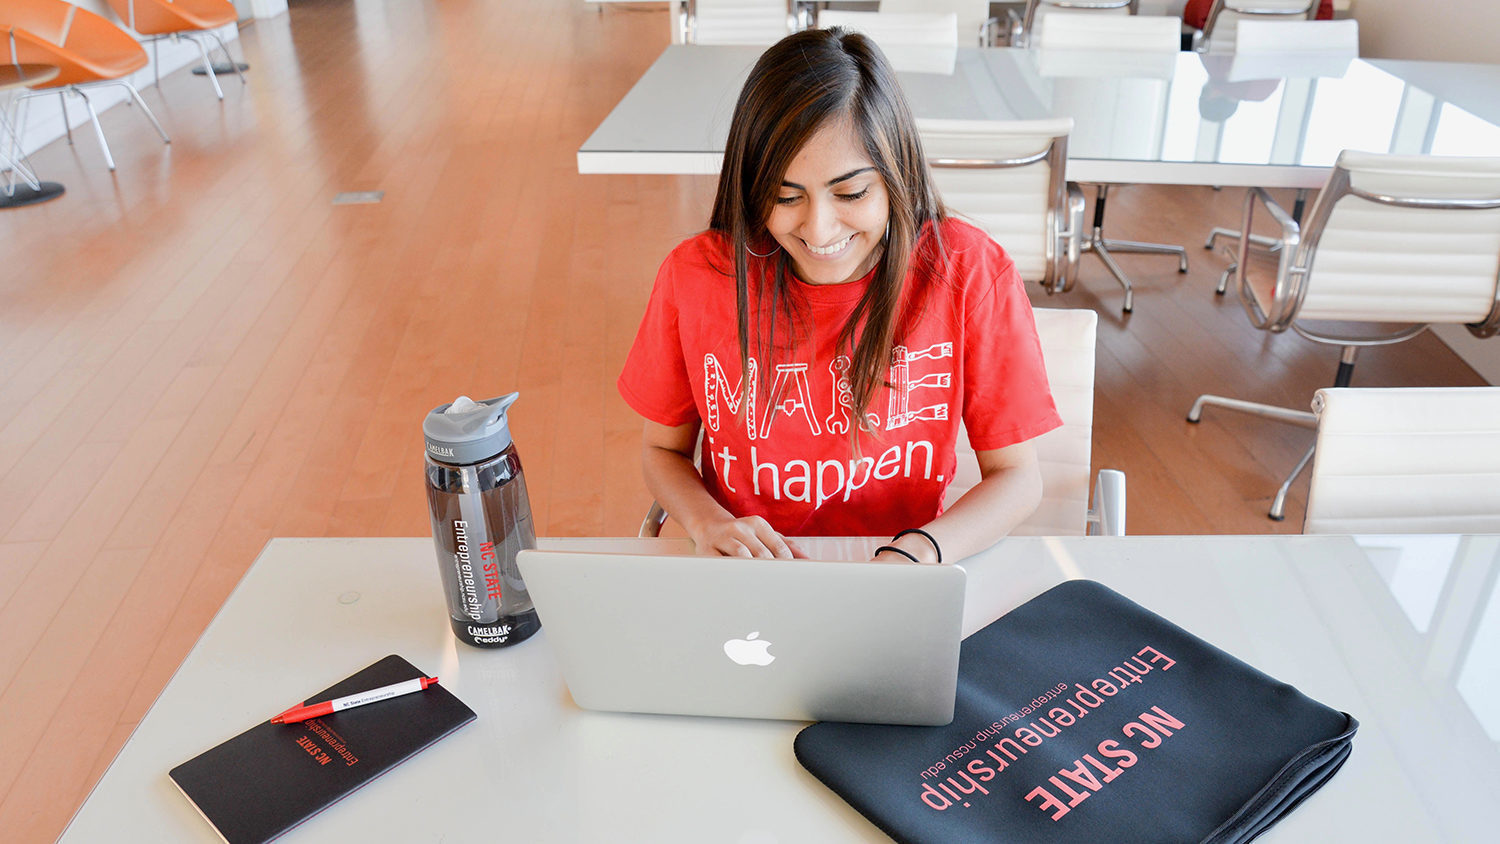 Girl working on her laptop wearing a "Make it happen" shirt in Hunt library.